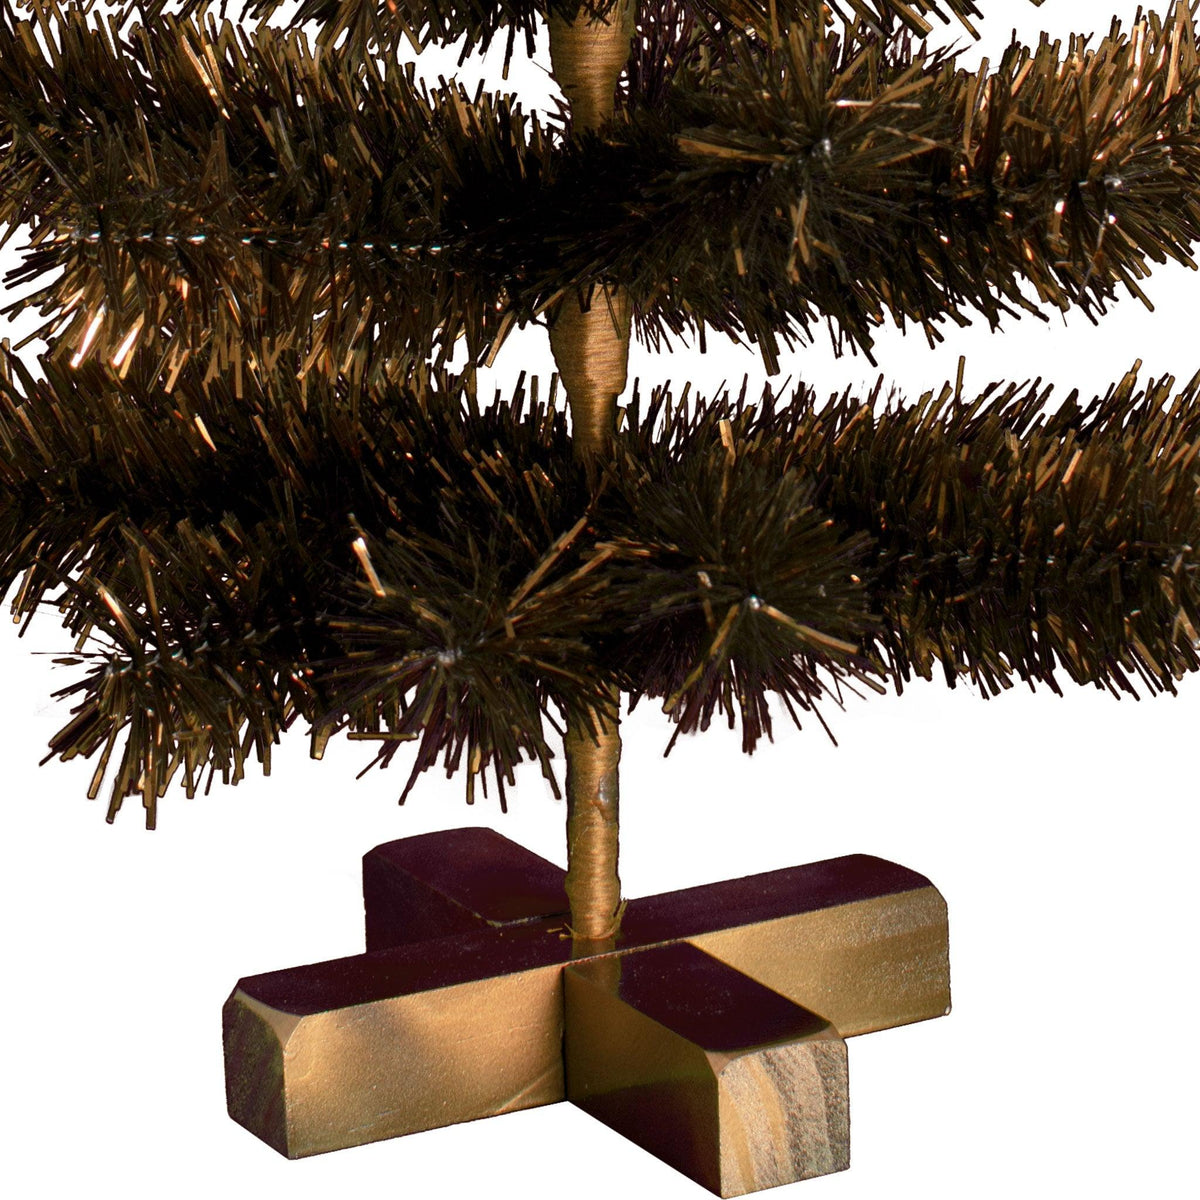 24in Tall Copper Trees come with a Wood Block Stand painted in shiny copper color.  On sale now at leedisplay.com